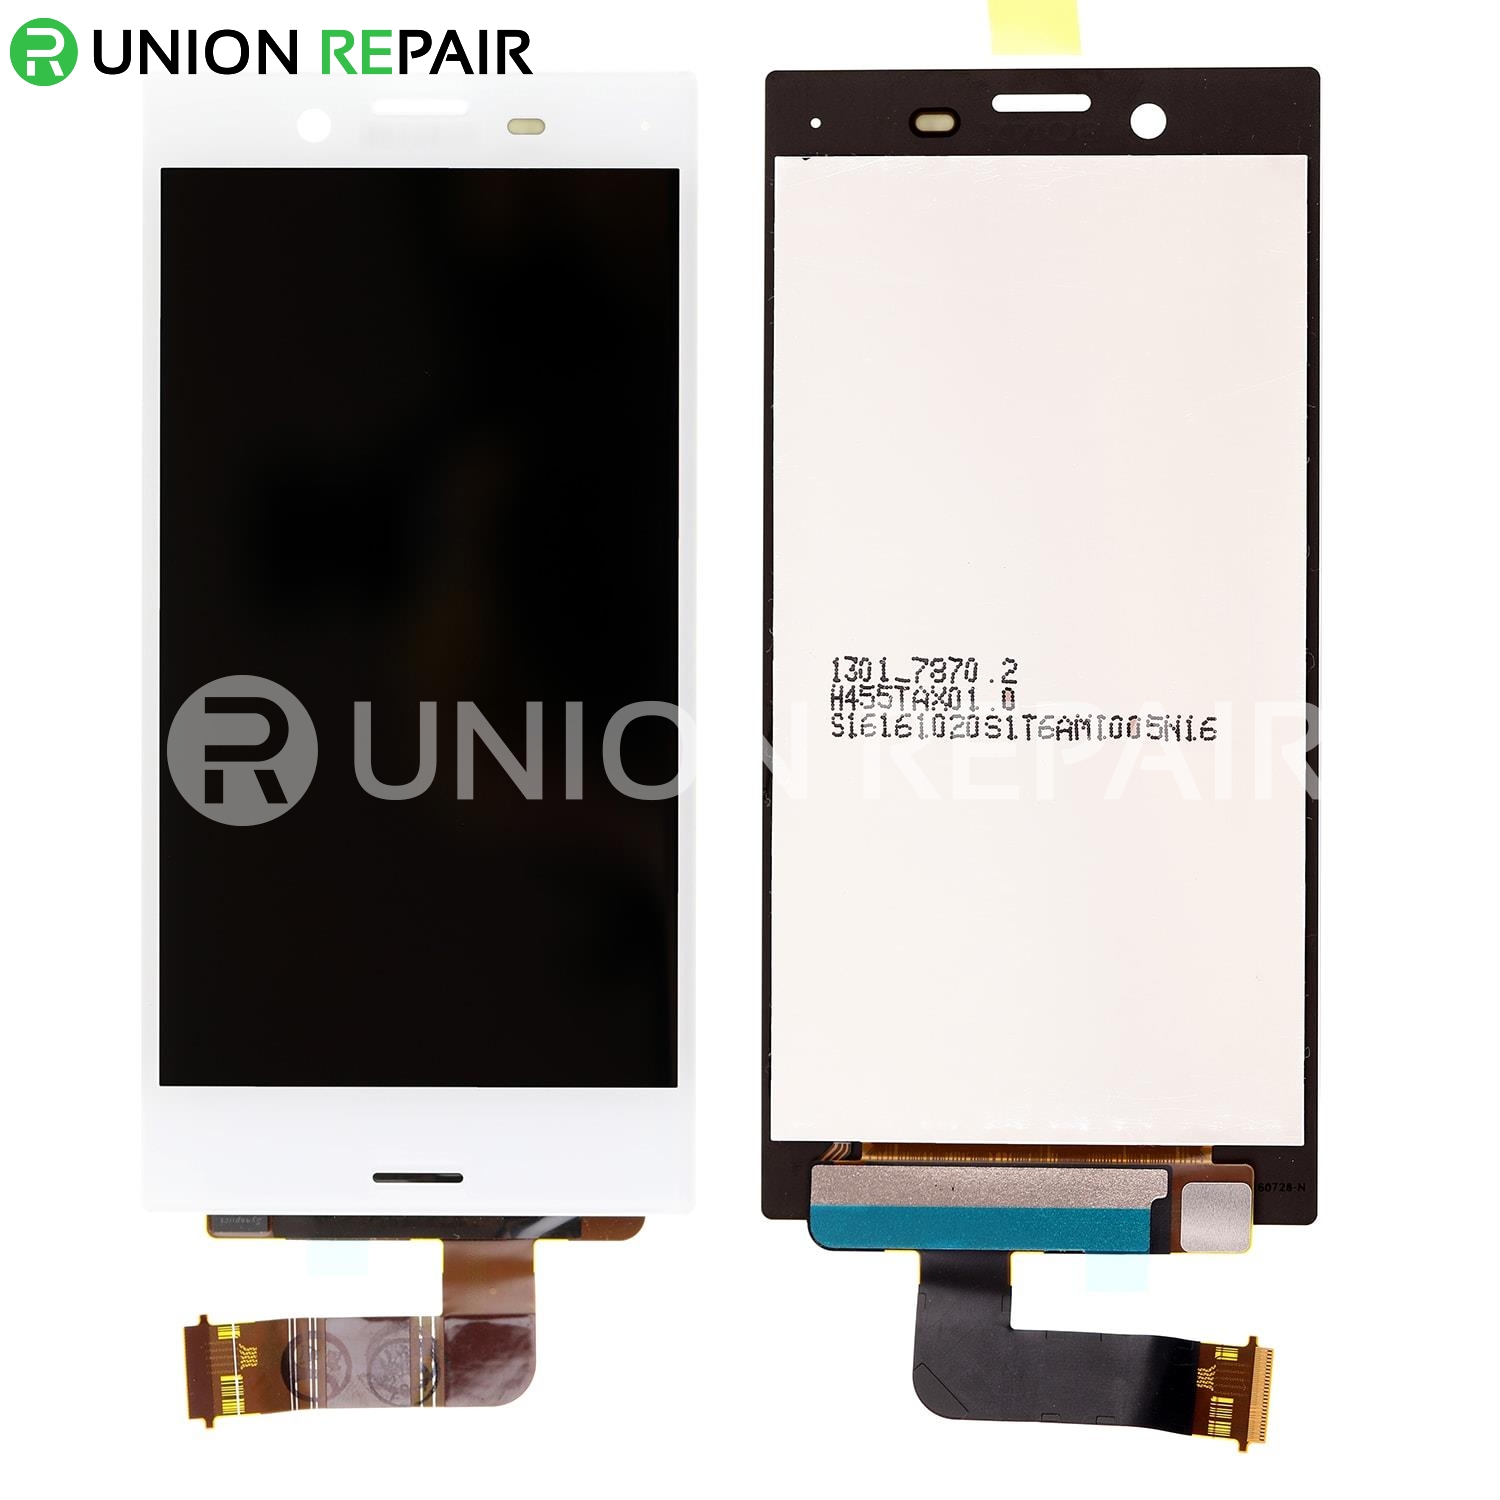 Replacement for Sony Xperia X Compact/Mini Screen with Digitizer Assembly - White